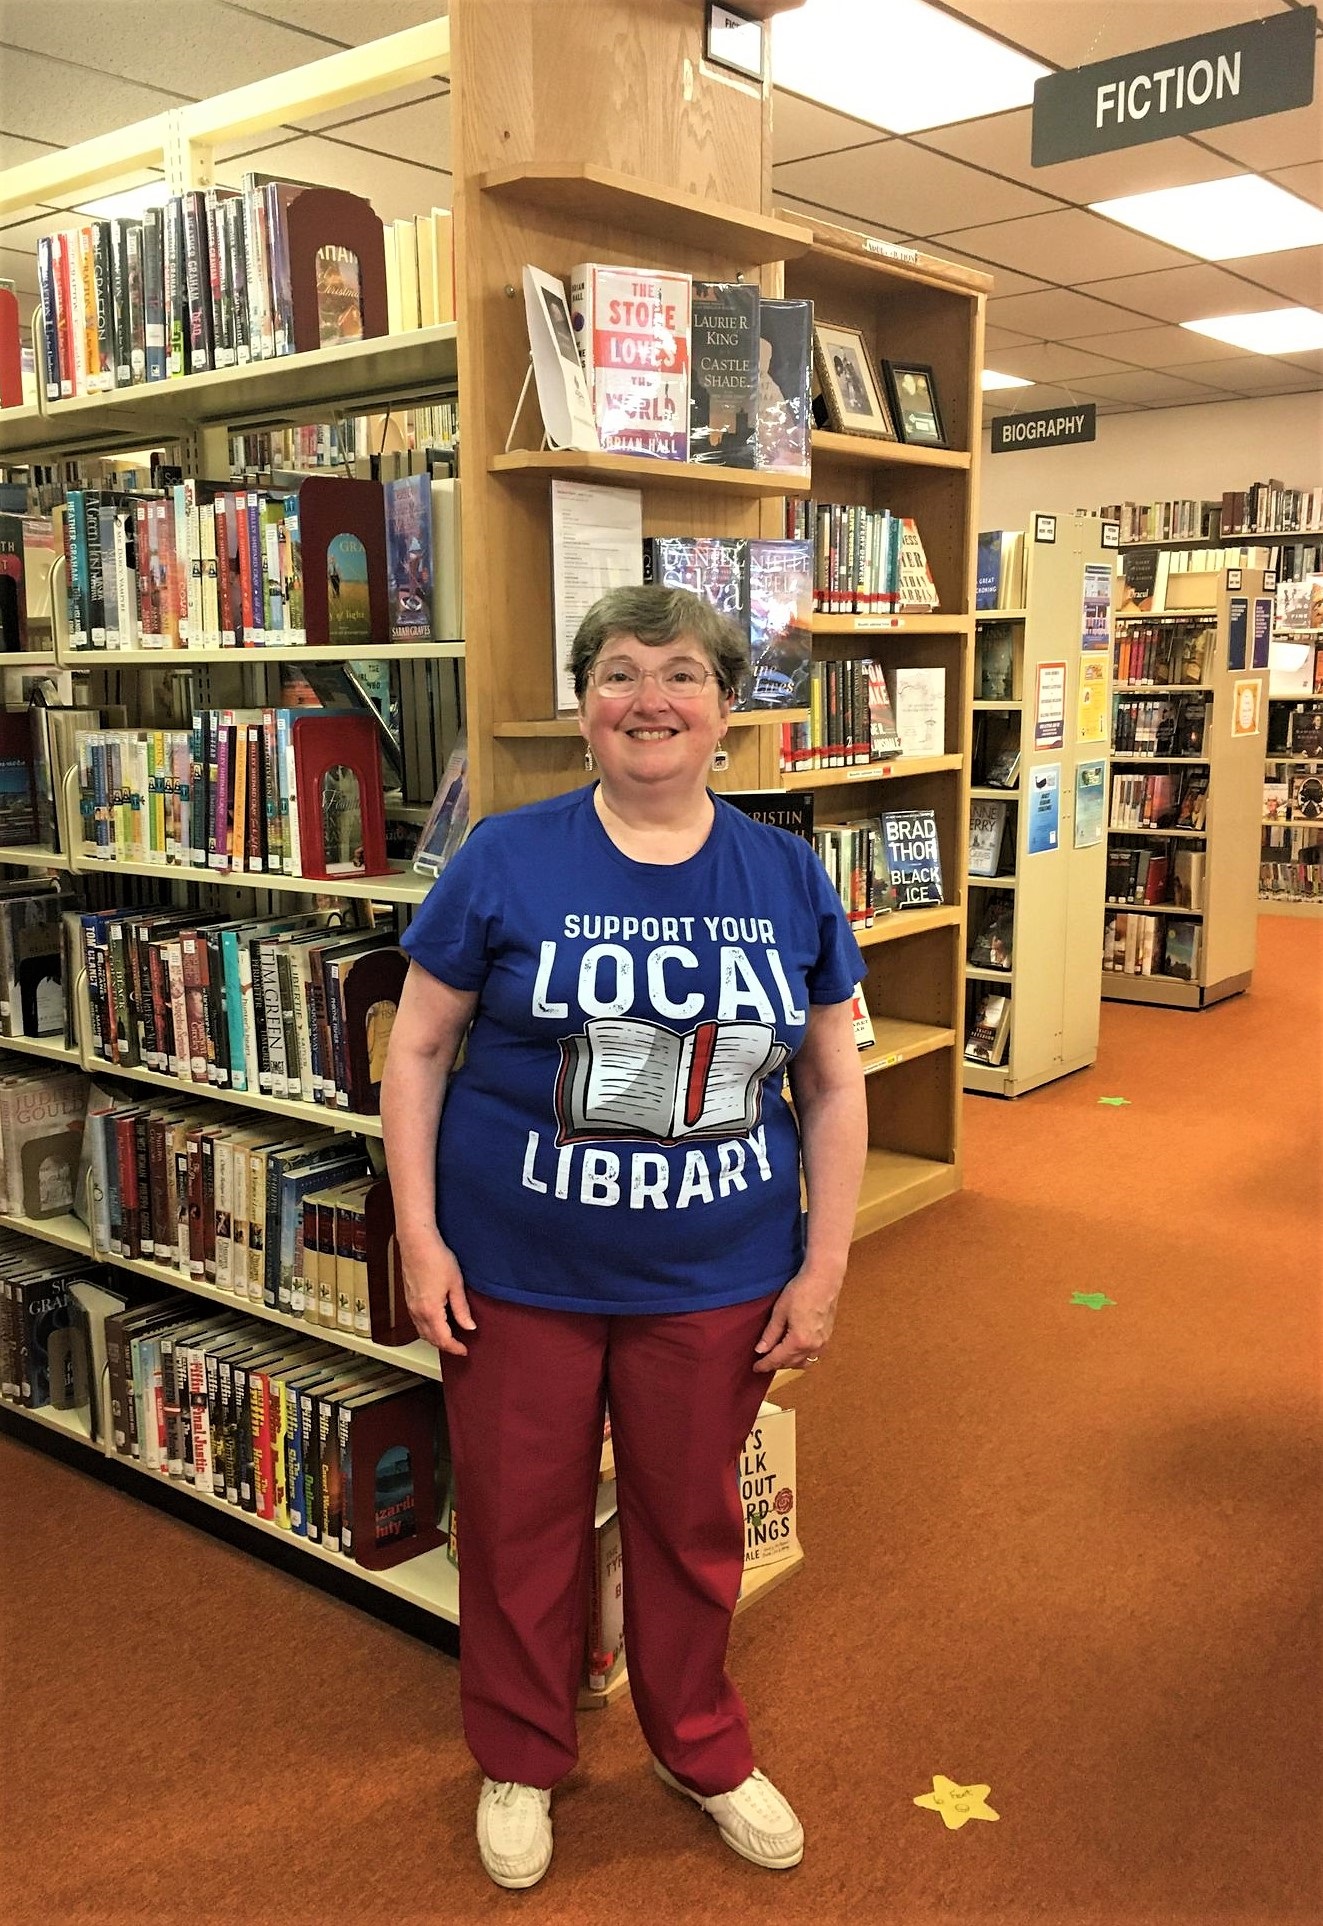 Support Your Local Library!